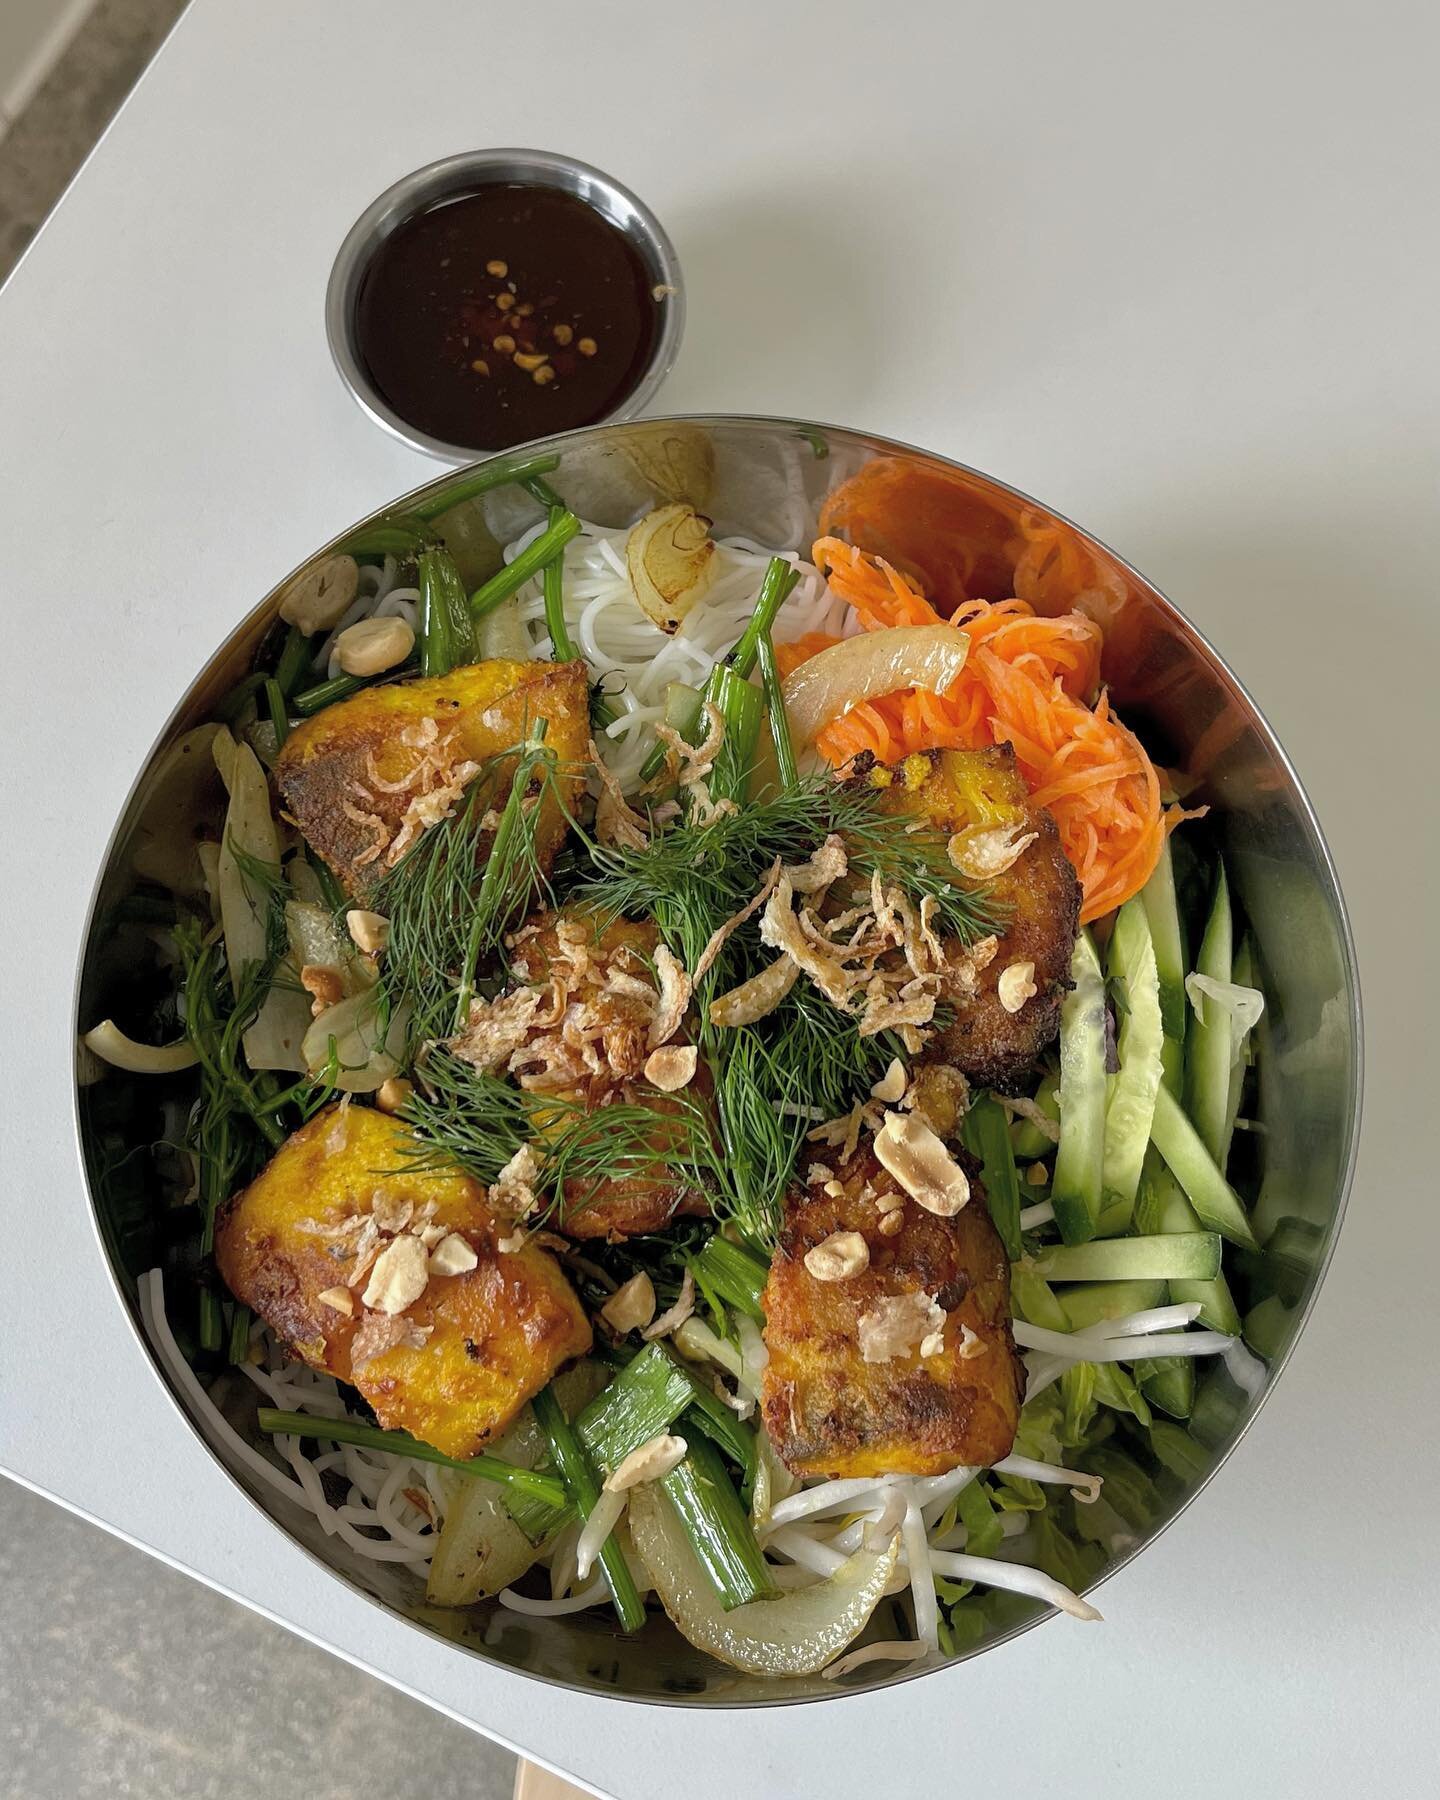 Our Fish Noodle Salad ~ b&uacute;n c&aacute; ~ seasoned with turmeric and tossed with fresh greens, dill, pickled carrots and rice noodles. Don&rsquo;t sleep on it!

#vietnamesefood